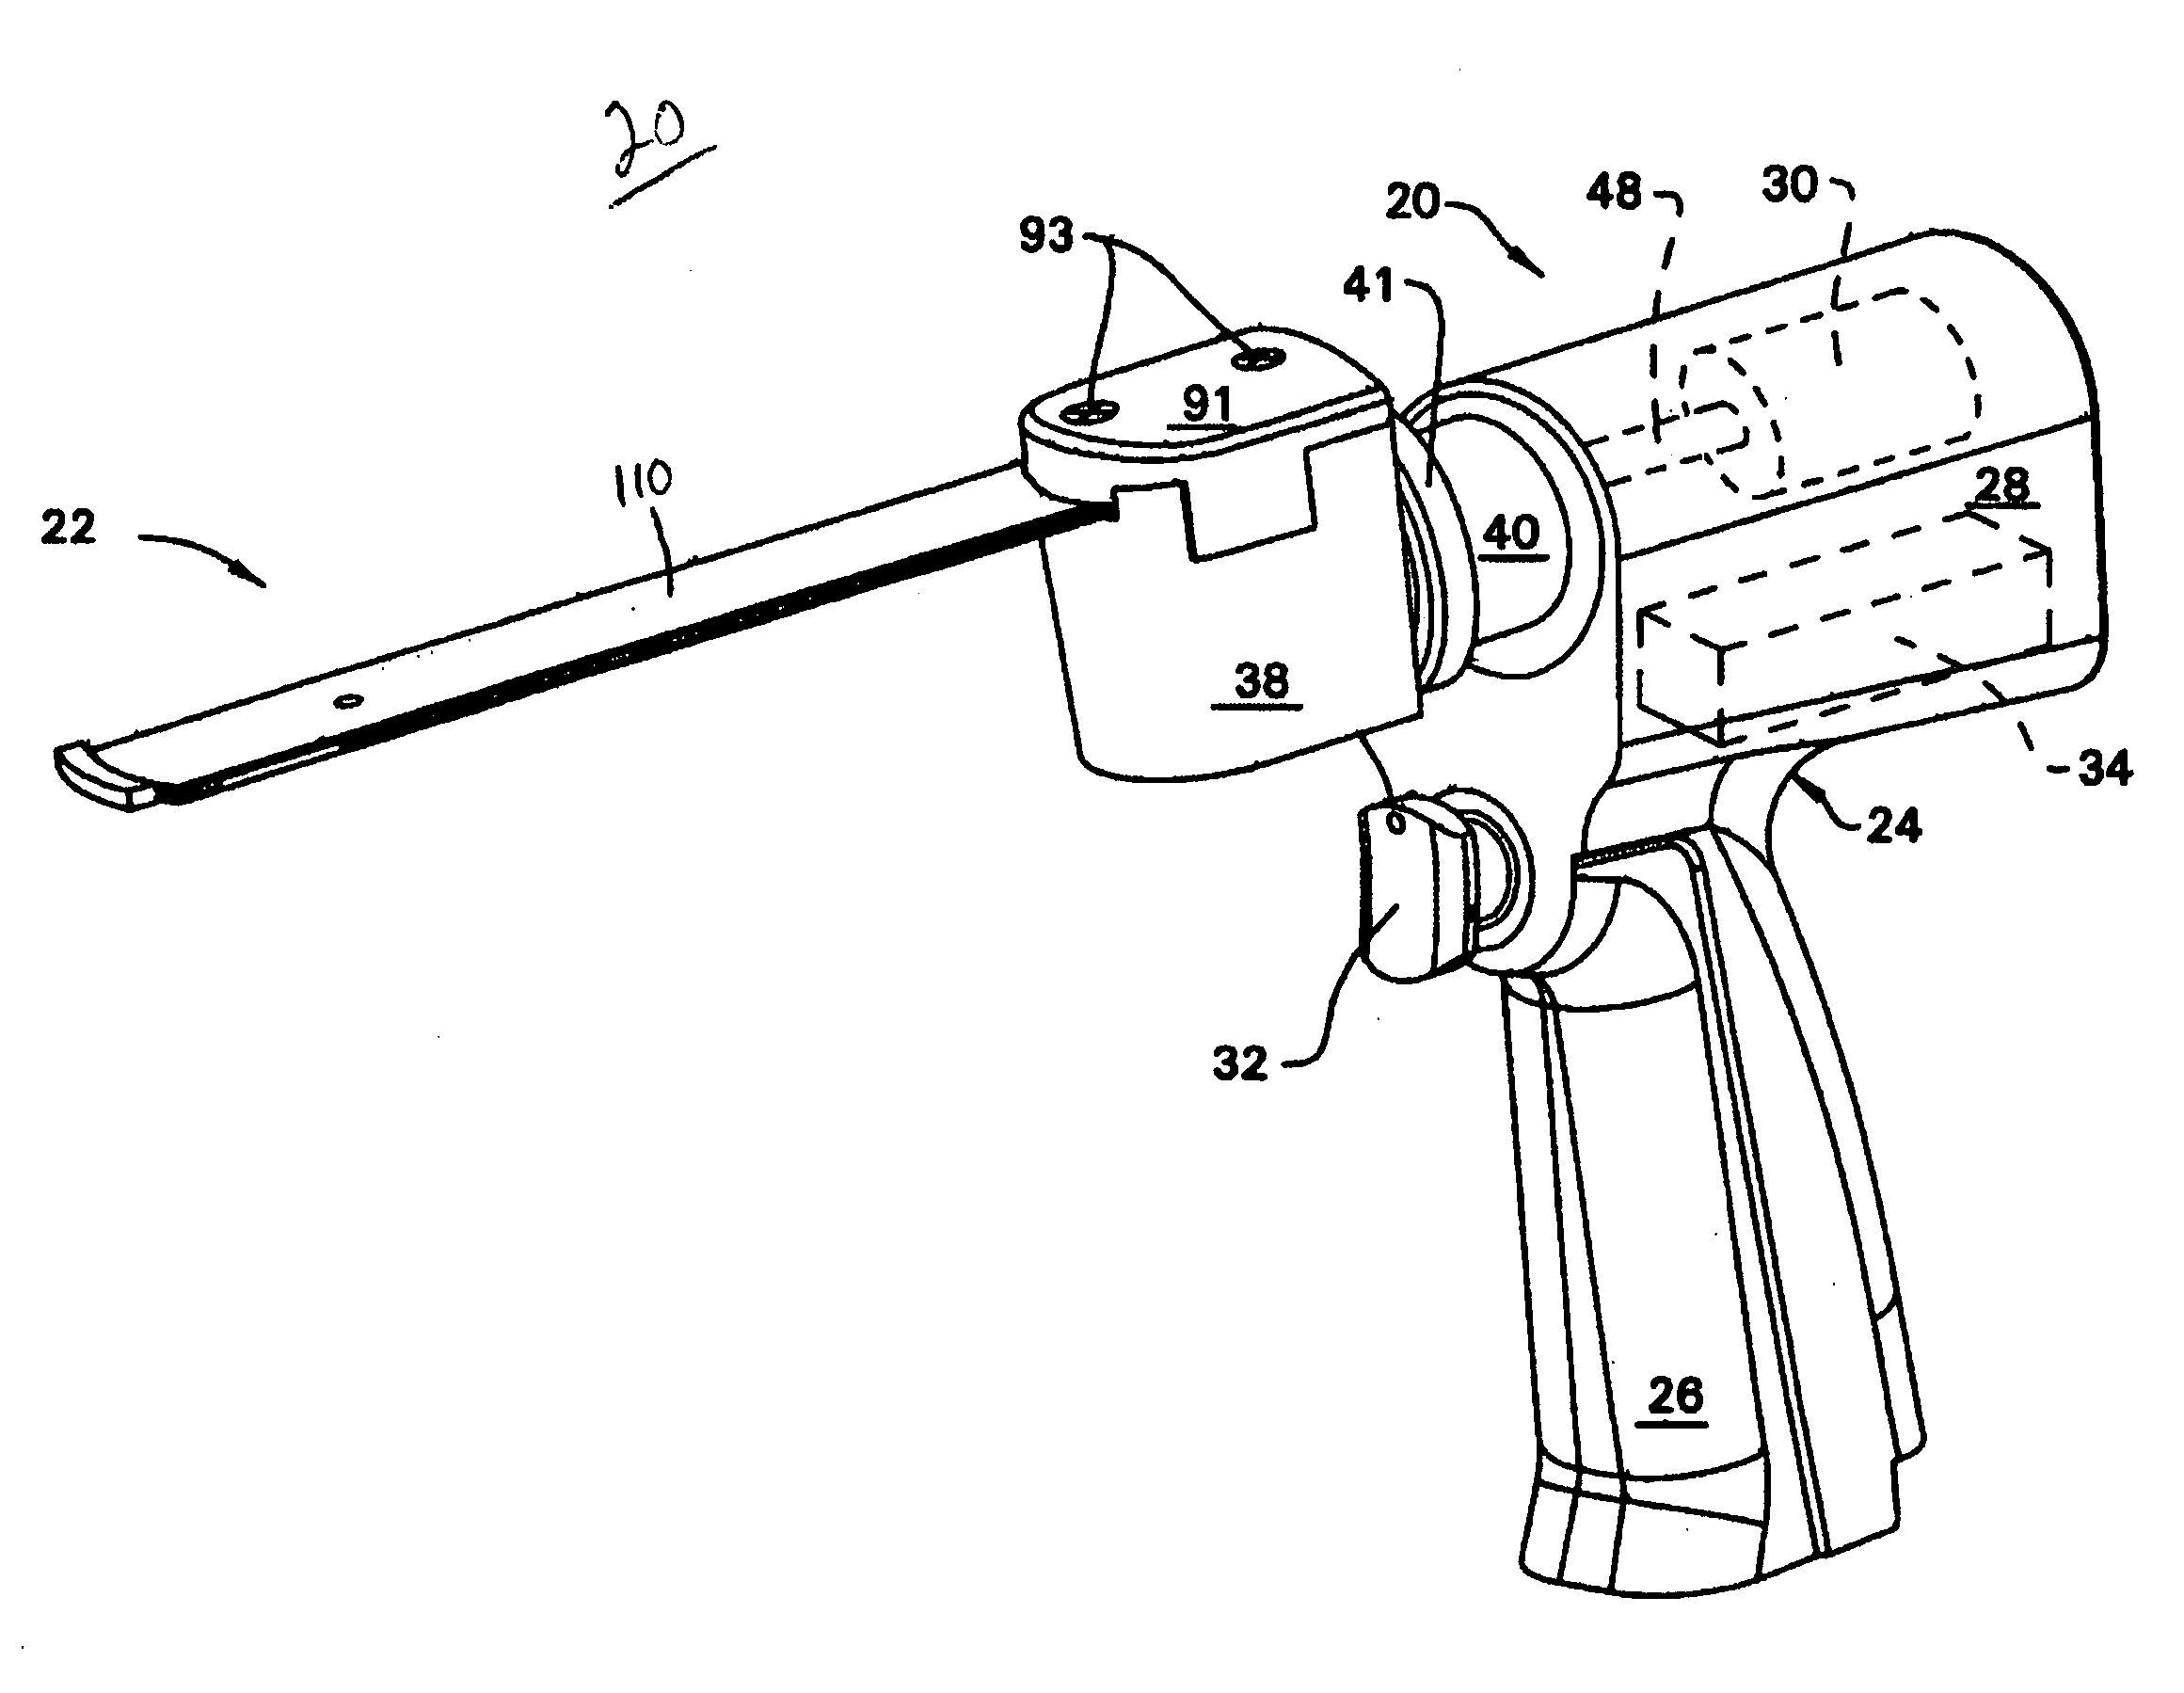 System for preparing bone for receiving an implant